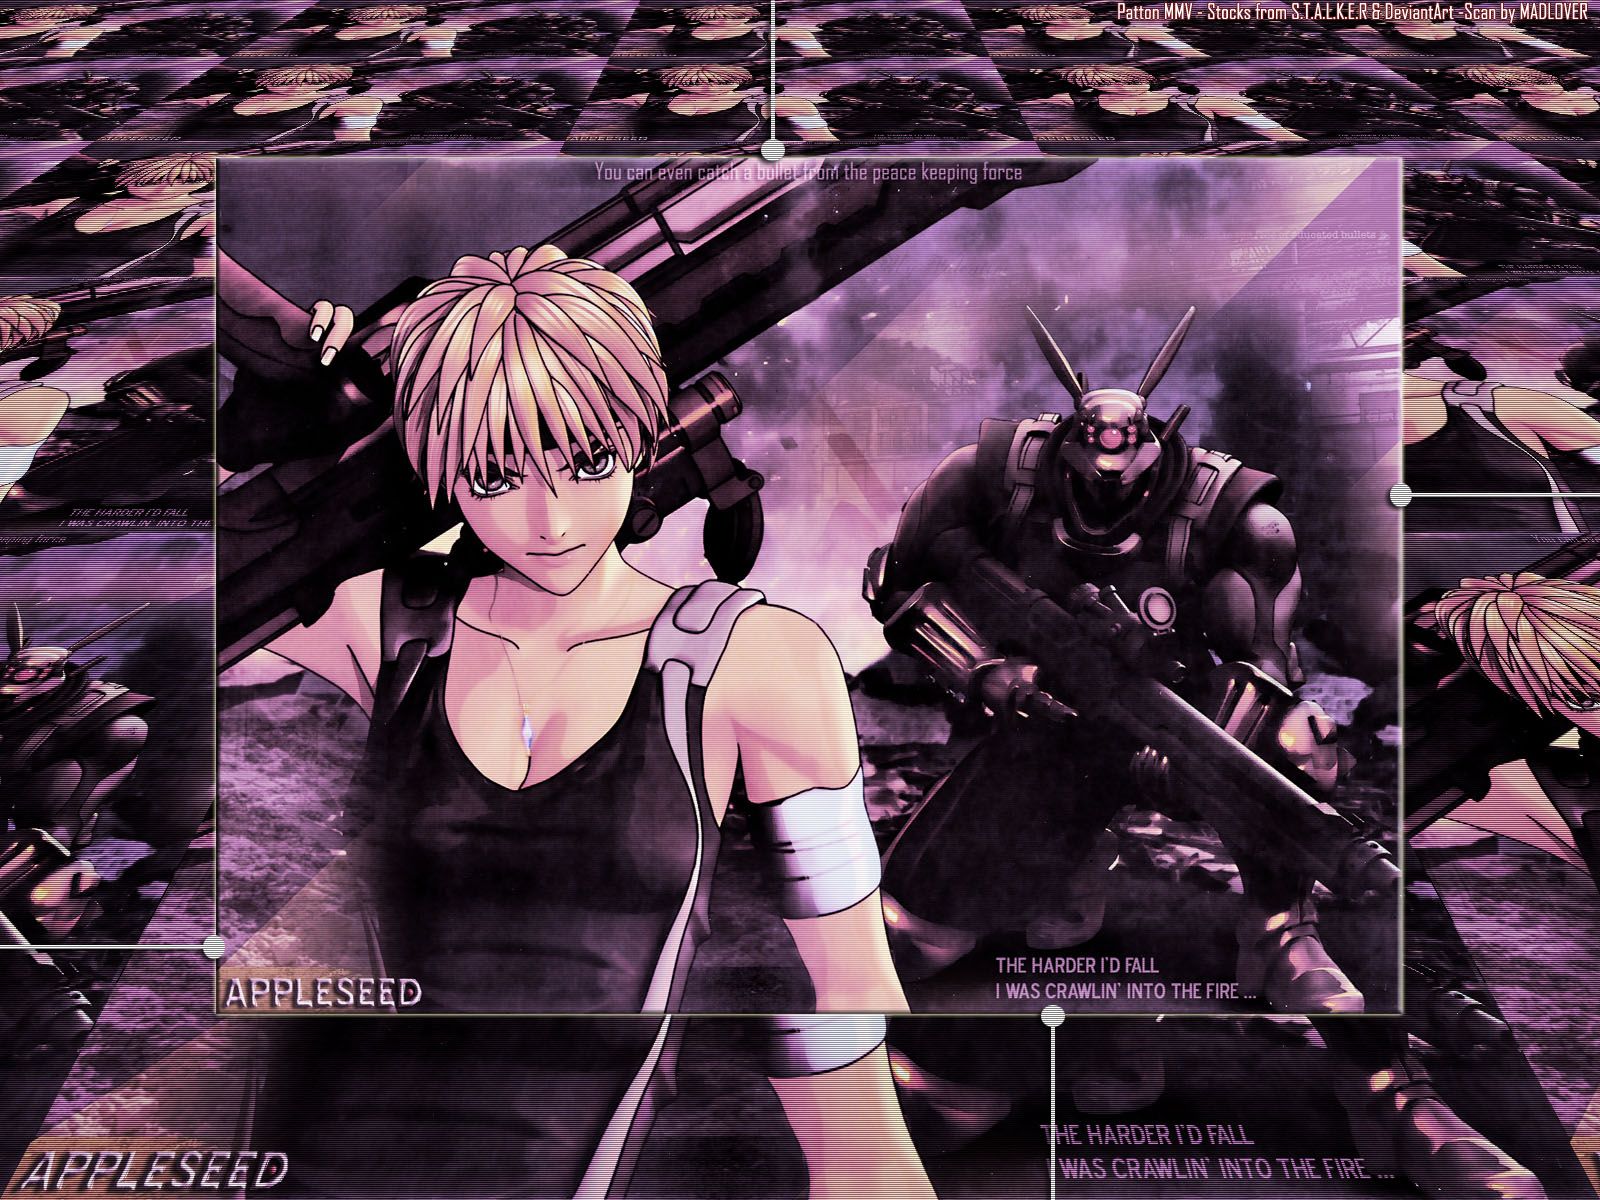 Appleseed and Scan Gallery